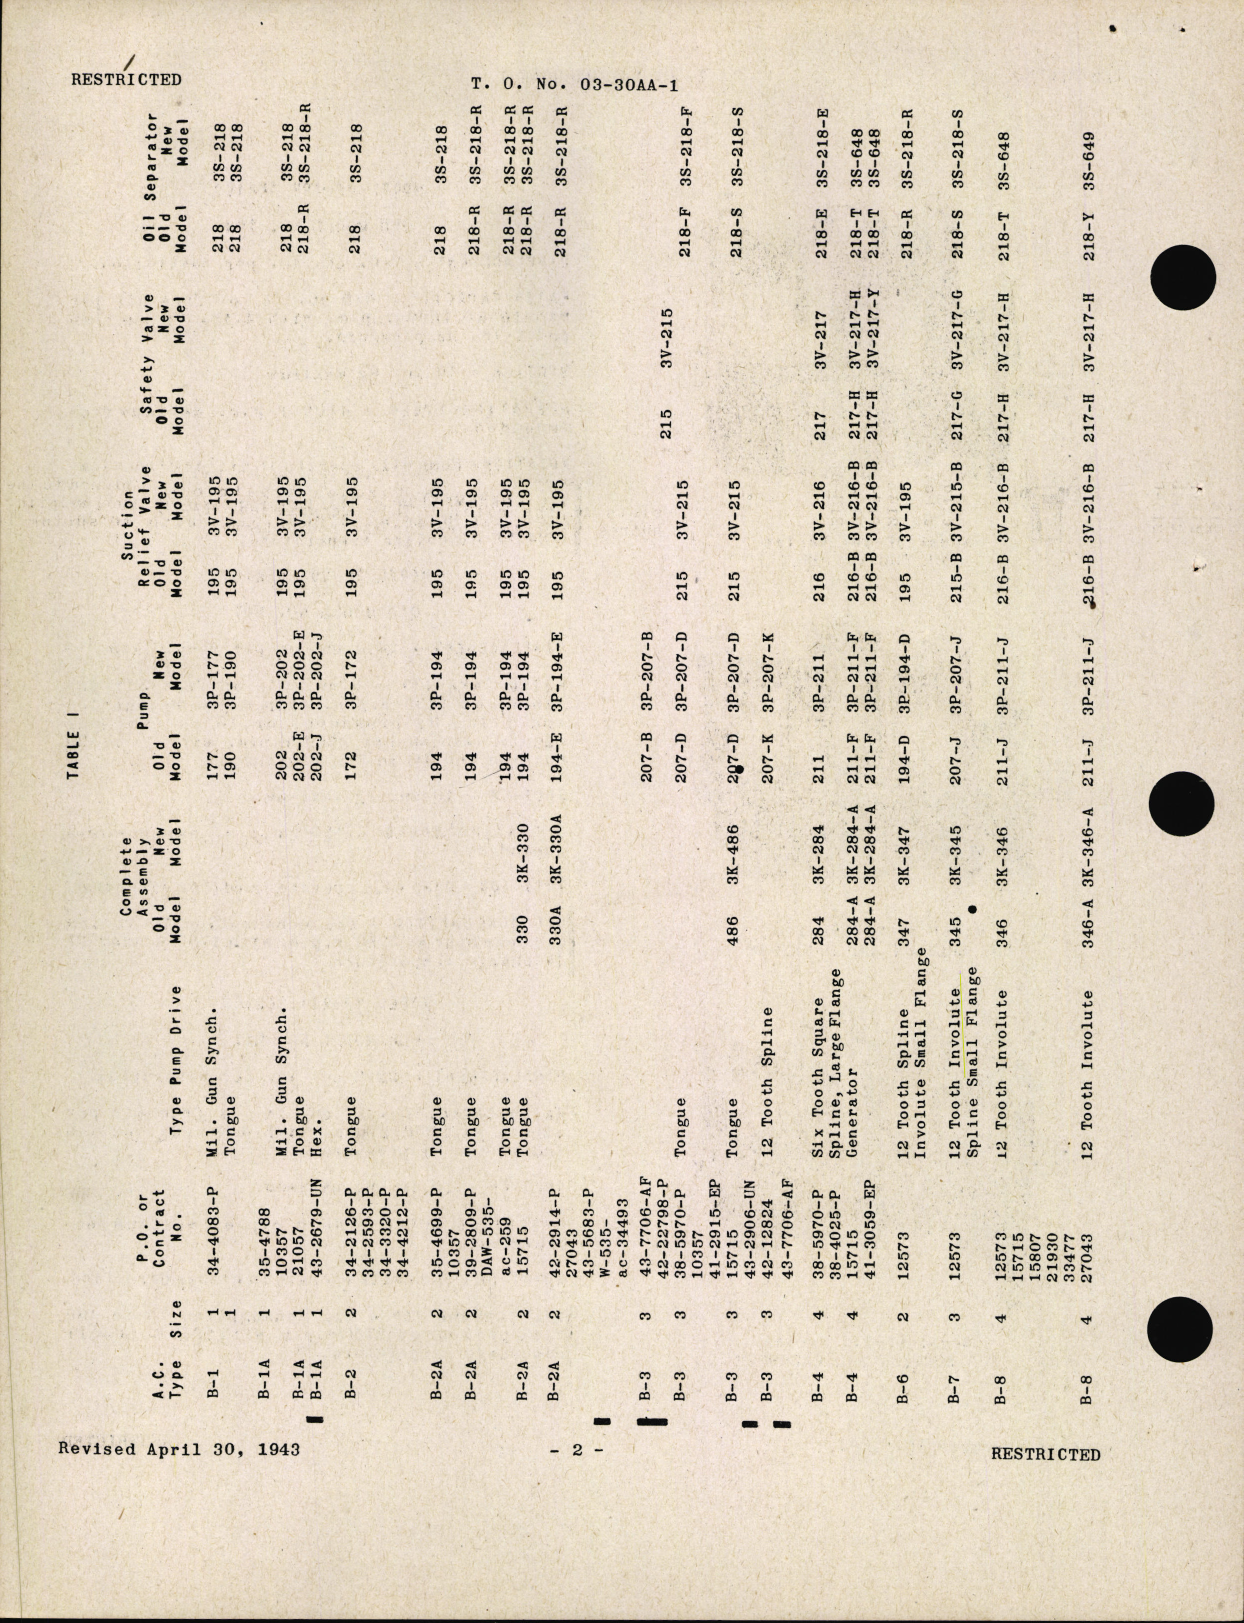 Sample page 6 from AirCorps Library document: Handbook of Instructions with Parts Catalog for Engine-Driven Vacuum Pumps